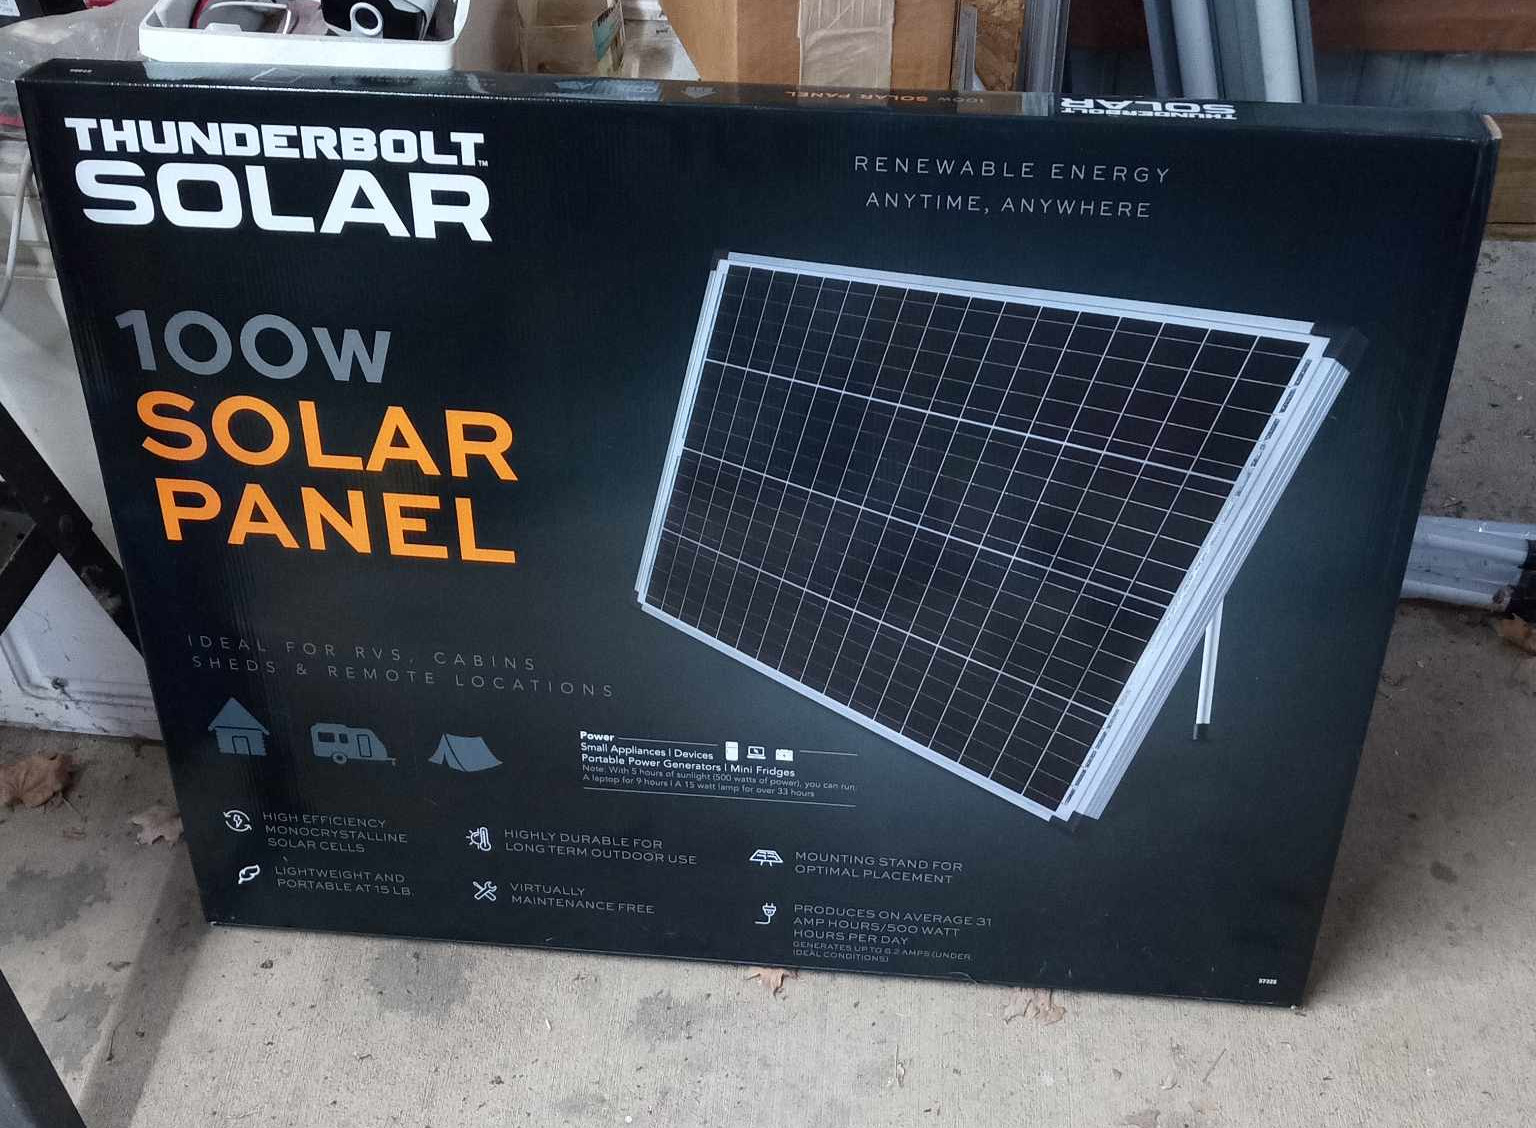 An overview of my Solar System, featuring a Harbor Freight Thunderbolt 100 WATT Panel